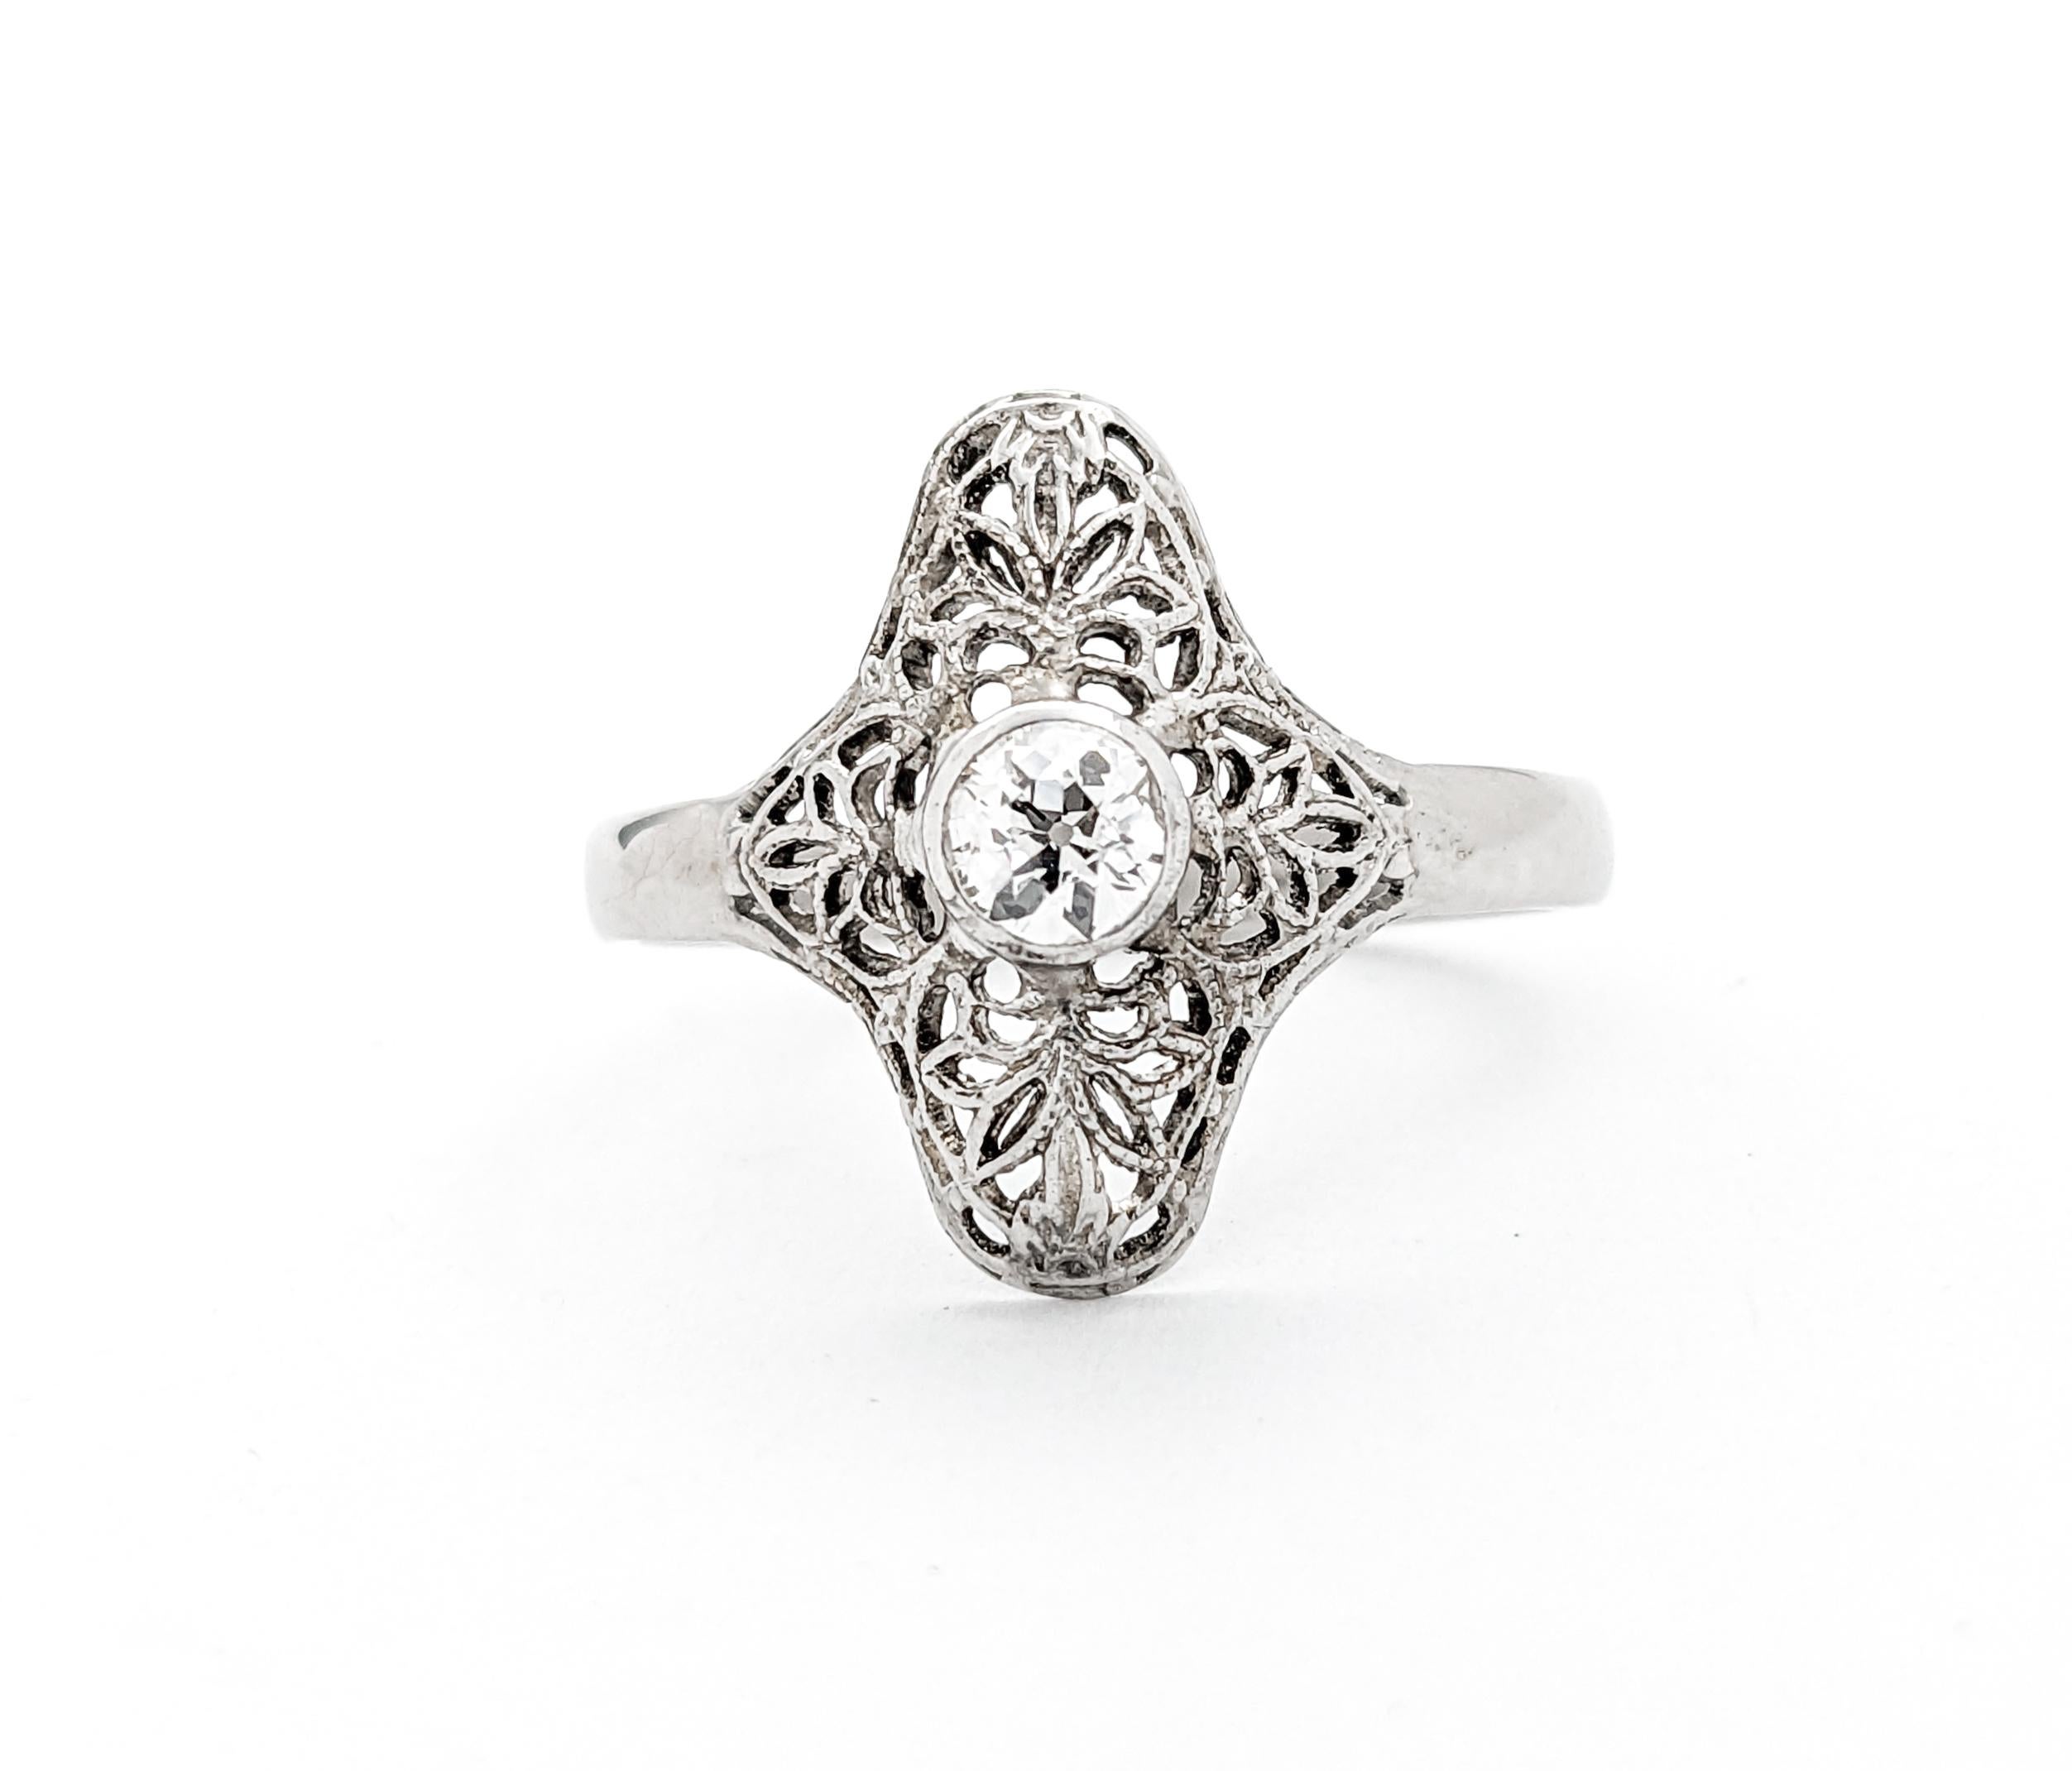 Antique Art Deco Style Filigree Ring In White Gold

This exquisite Antique Ring, crafted in the timeless Art Deco style, is a testament to the elegance and sophistication of the era. Meticulously fashioned in 14k White Gold, this piece features